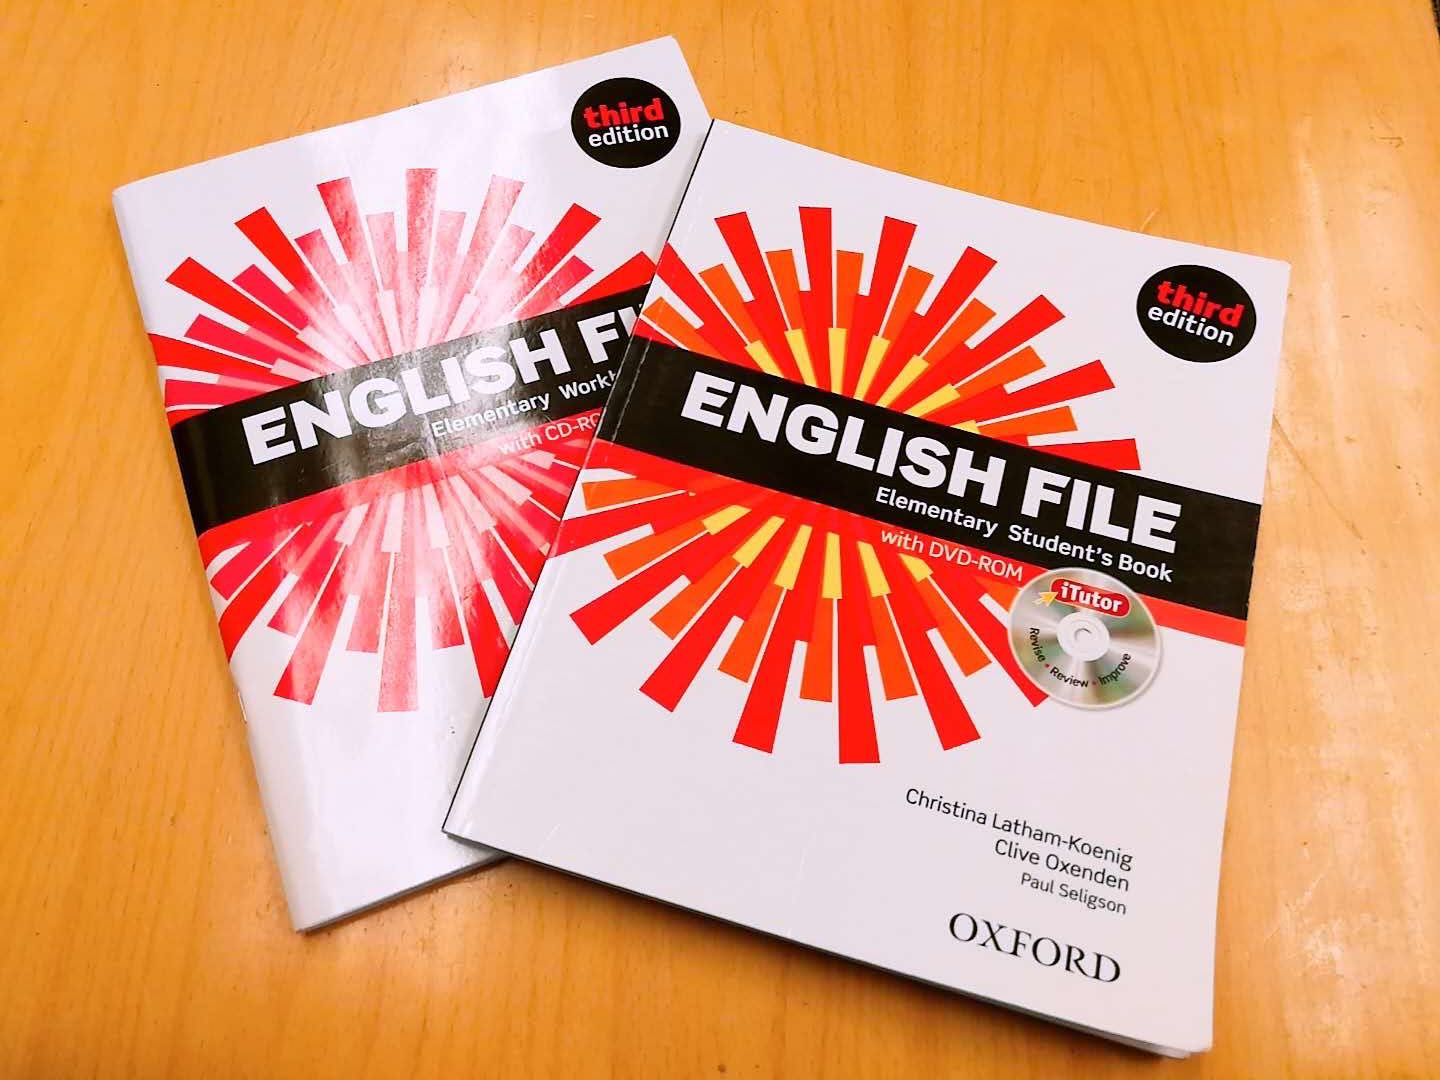 English file elementary 3rd edition. New English file Elementary третье издание. Элементари English file. English file: Elementary. Учебник English file Elementary.